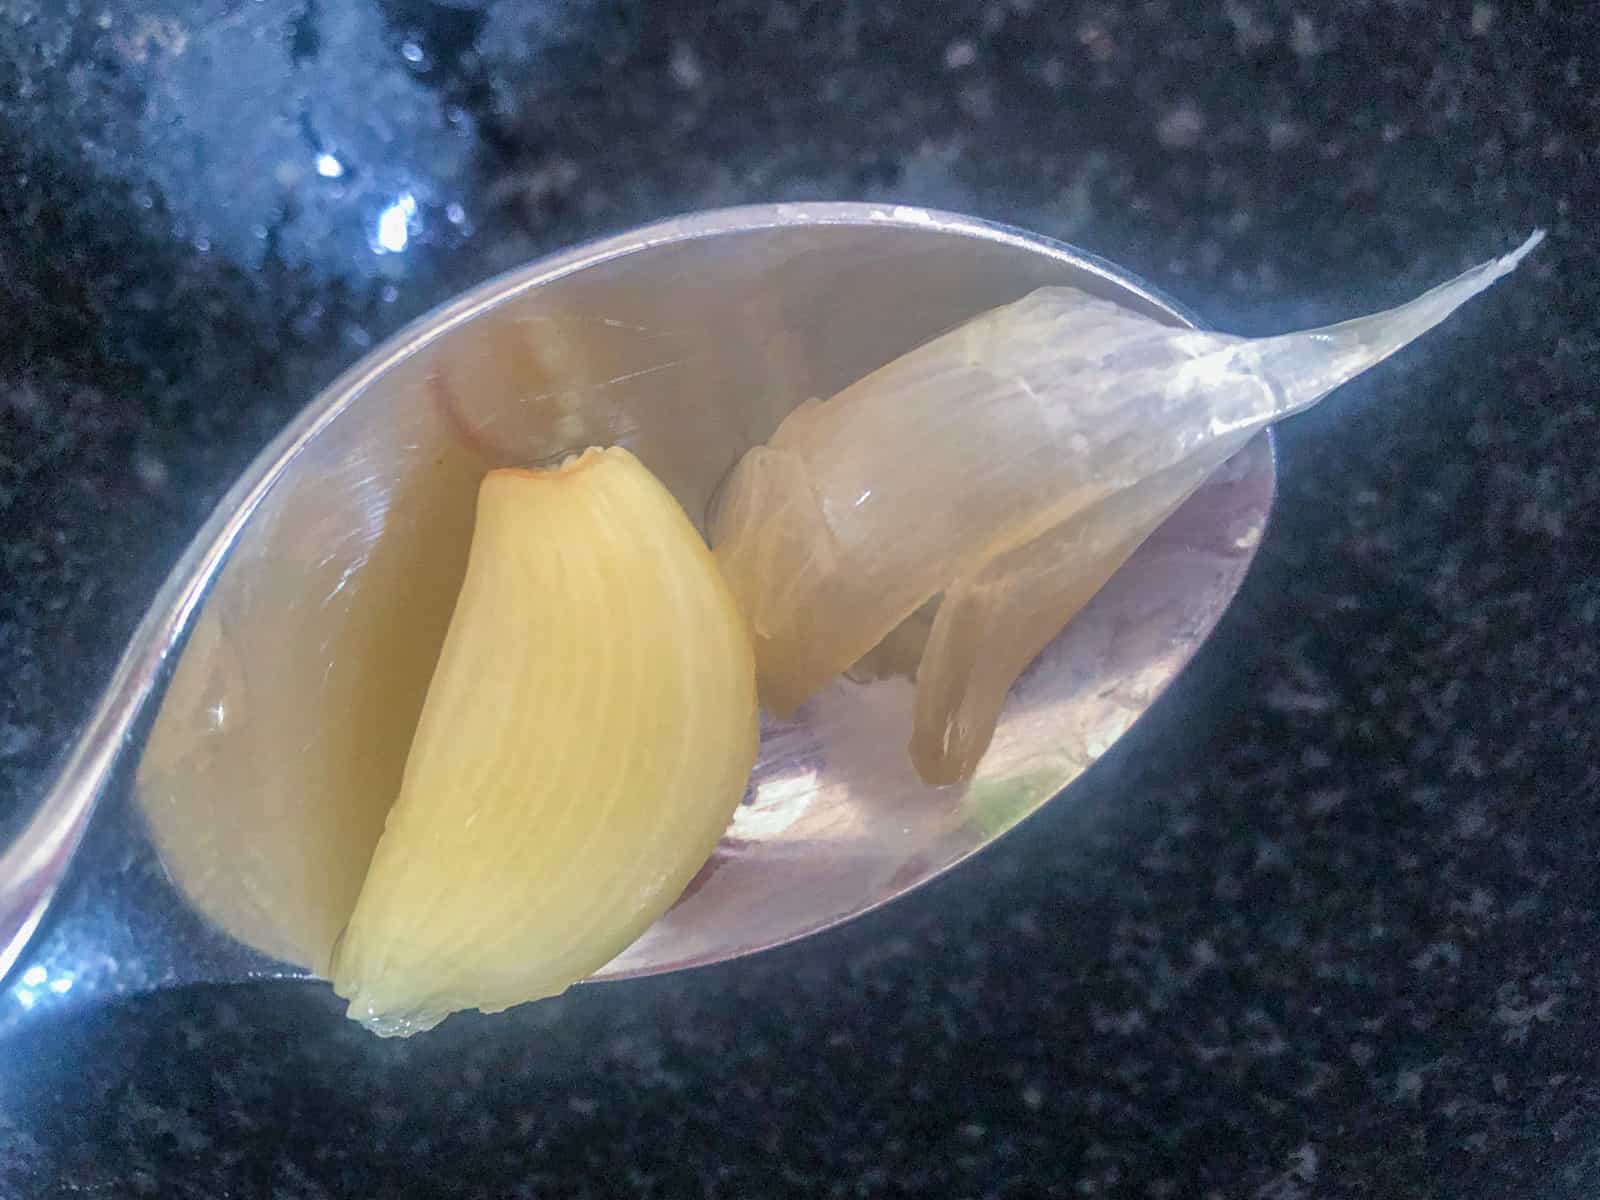 A garlic clove removed from its skin.